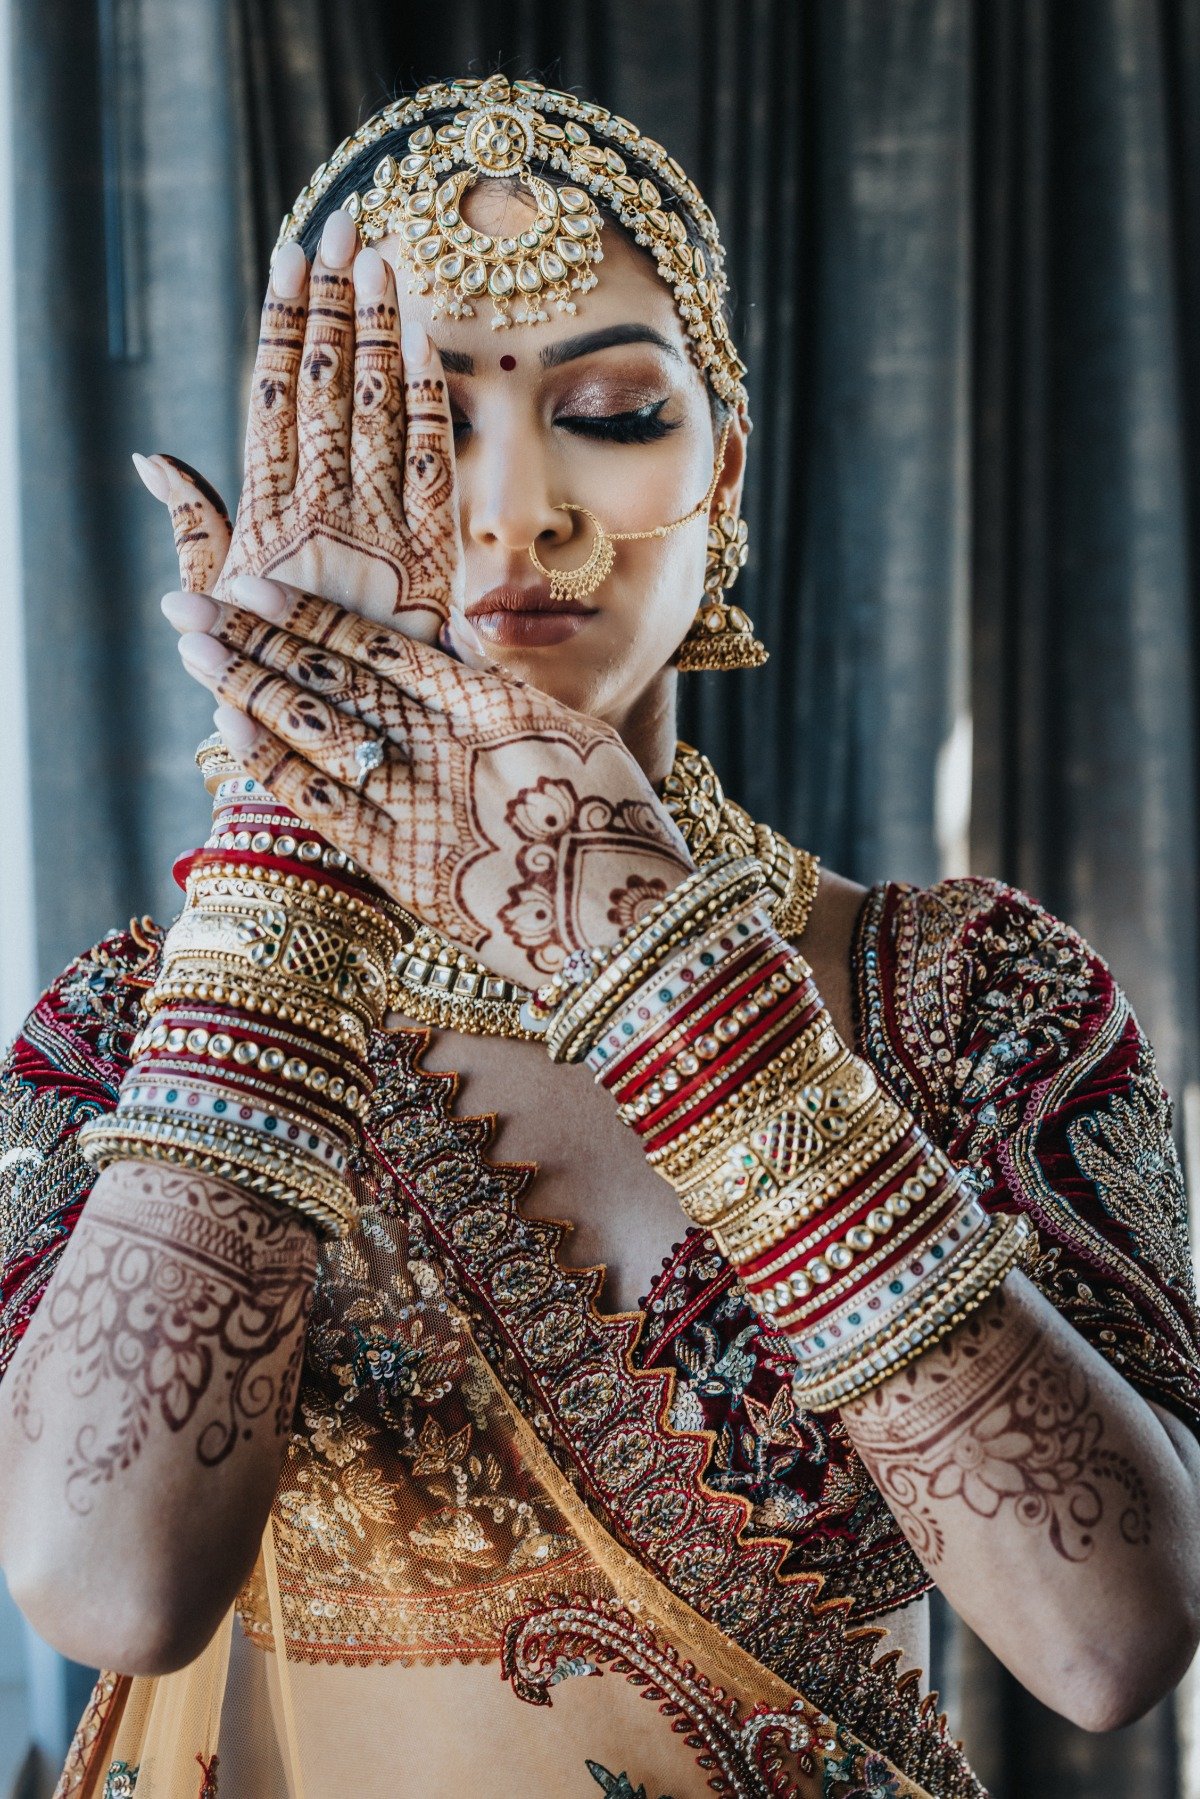 6The bride holding up arms covered in henna and bracelets showing engagement ring